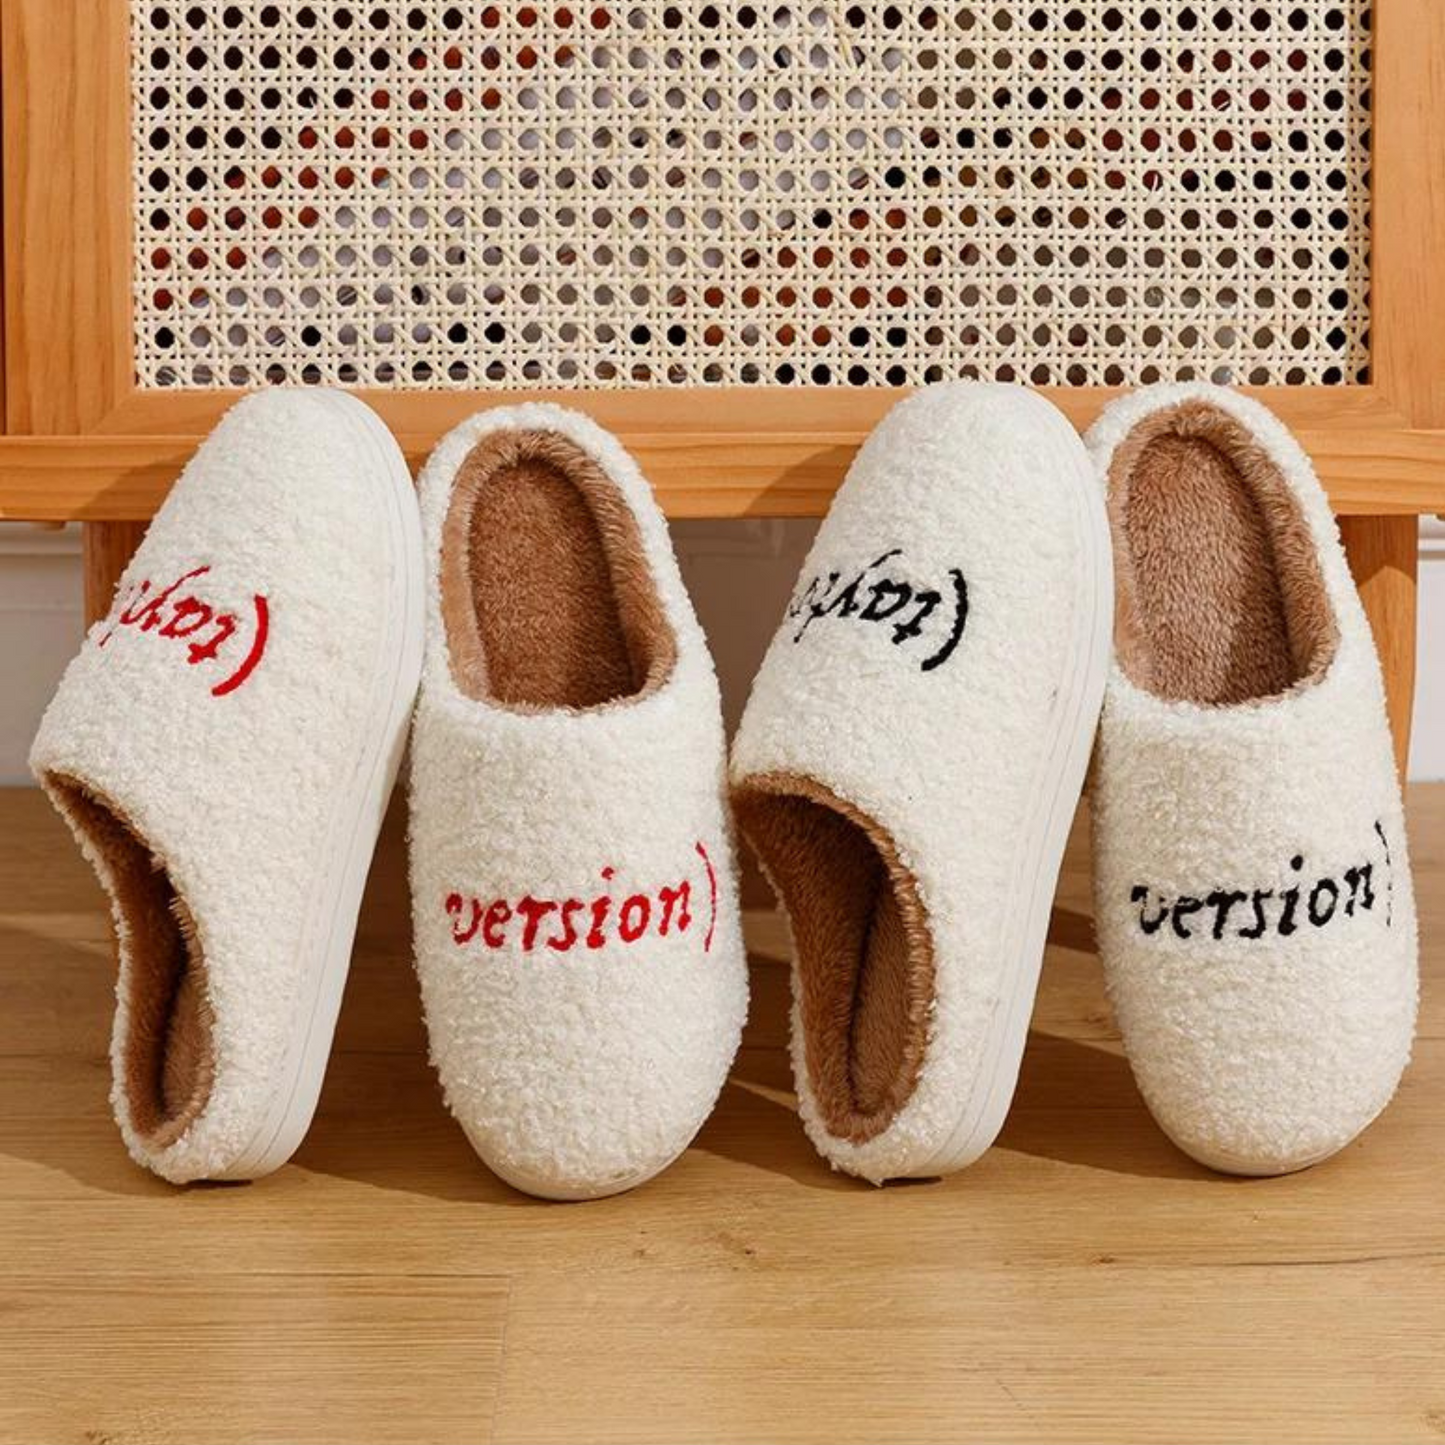 Taylors Version Slippers - Red and Black variants